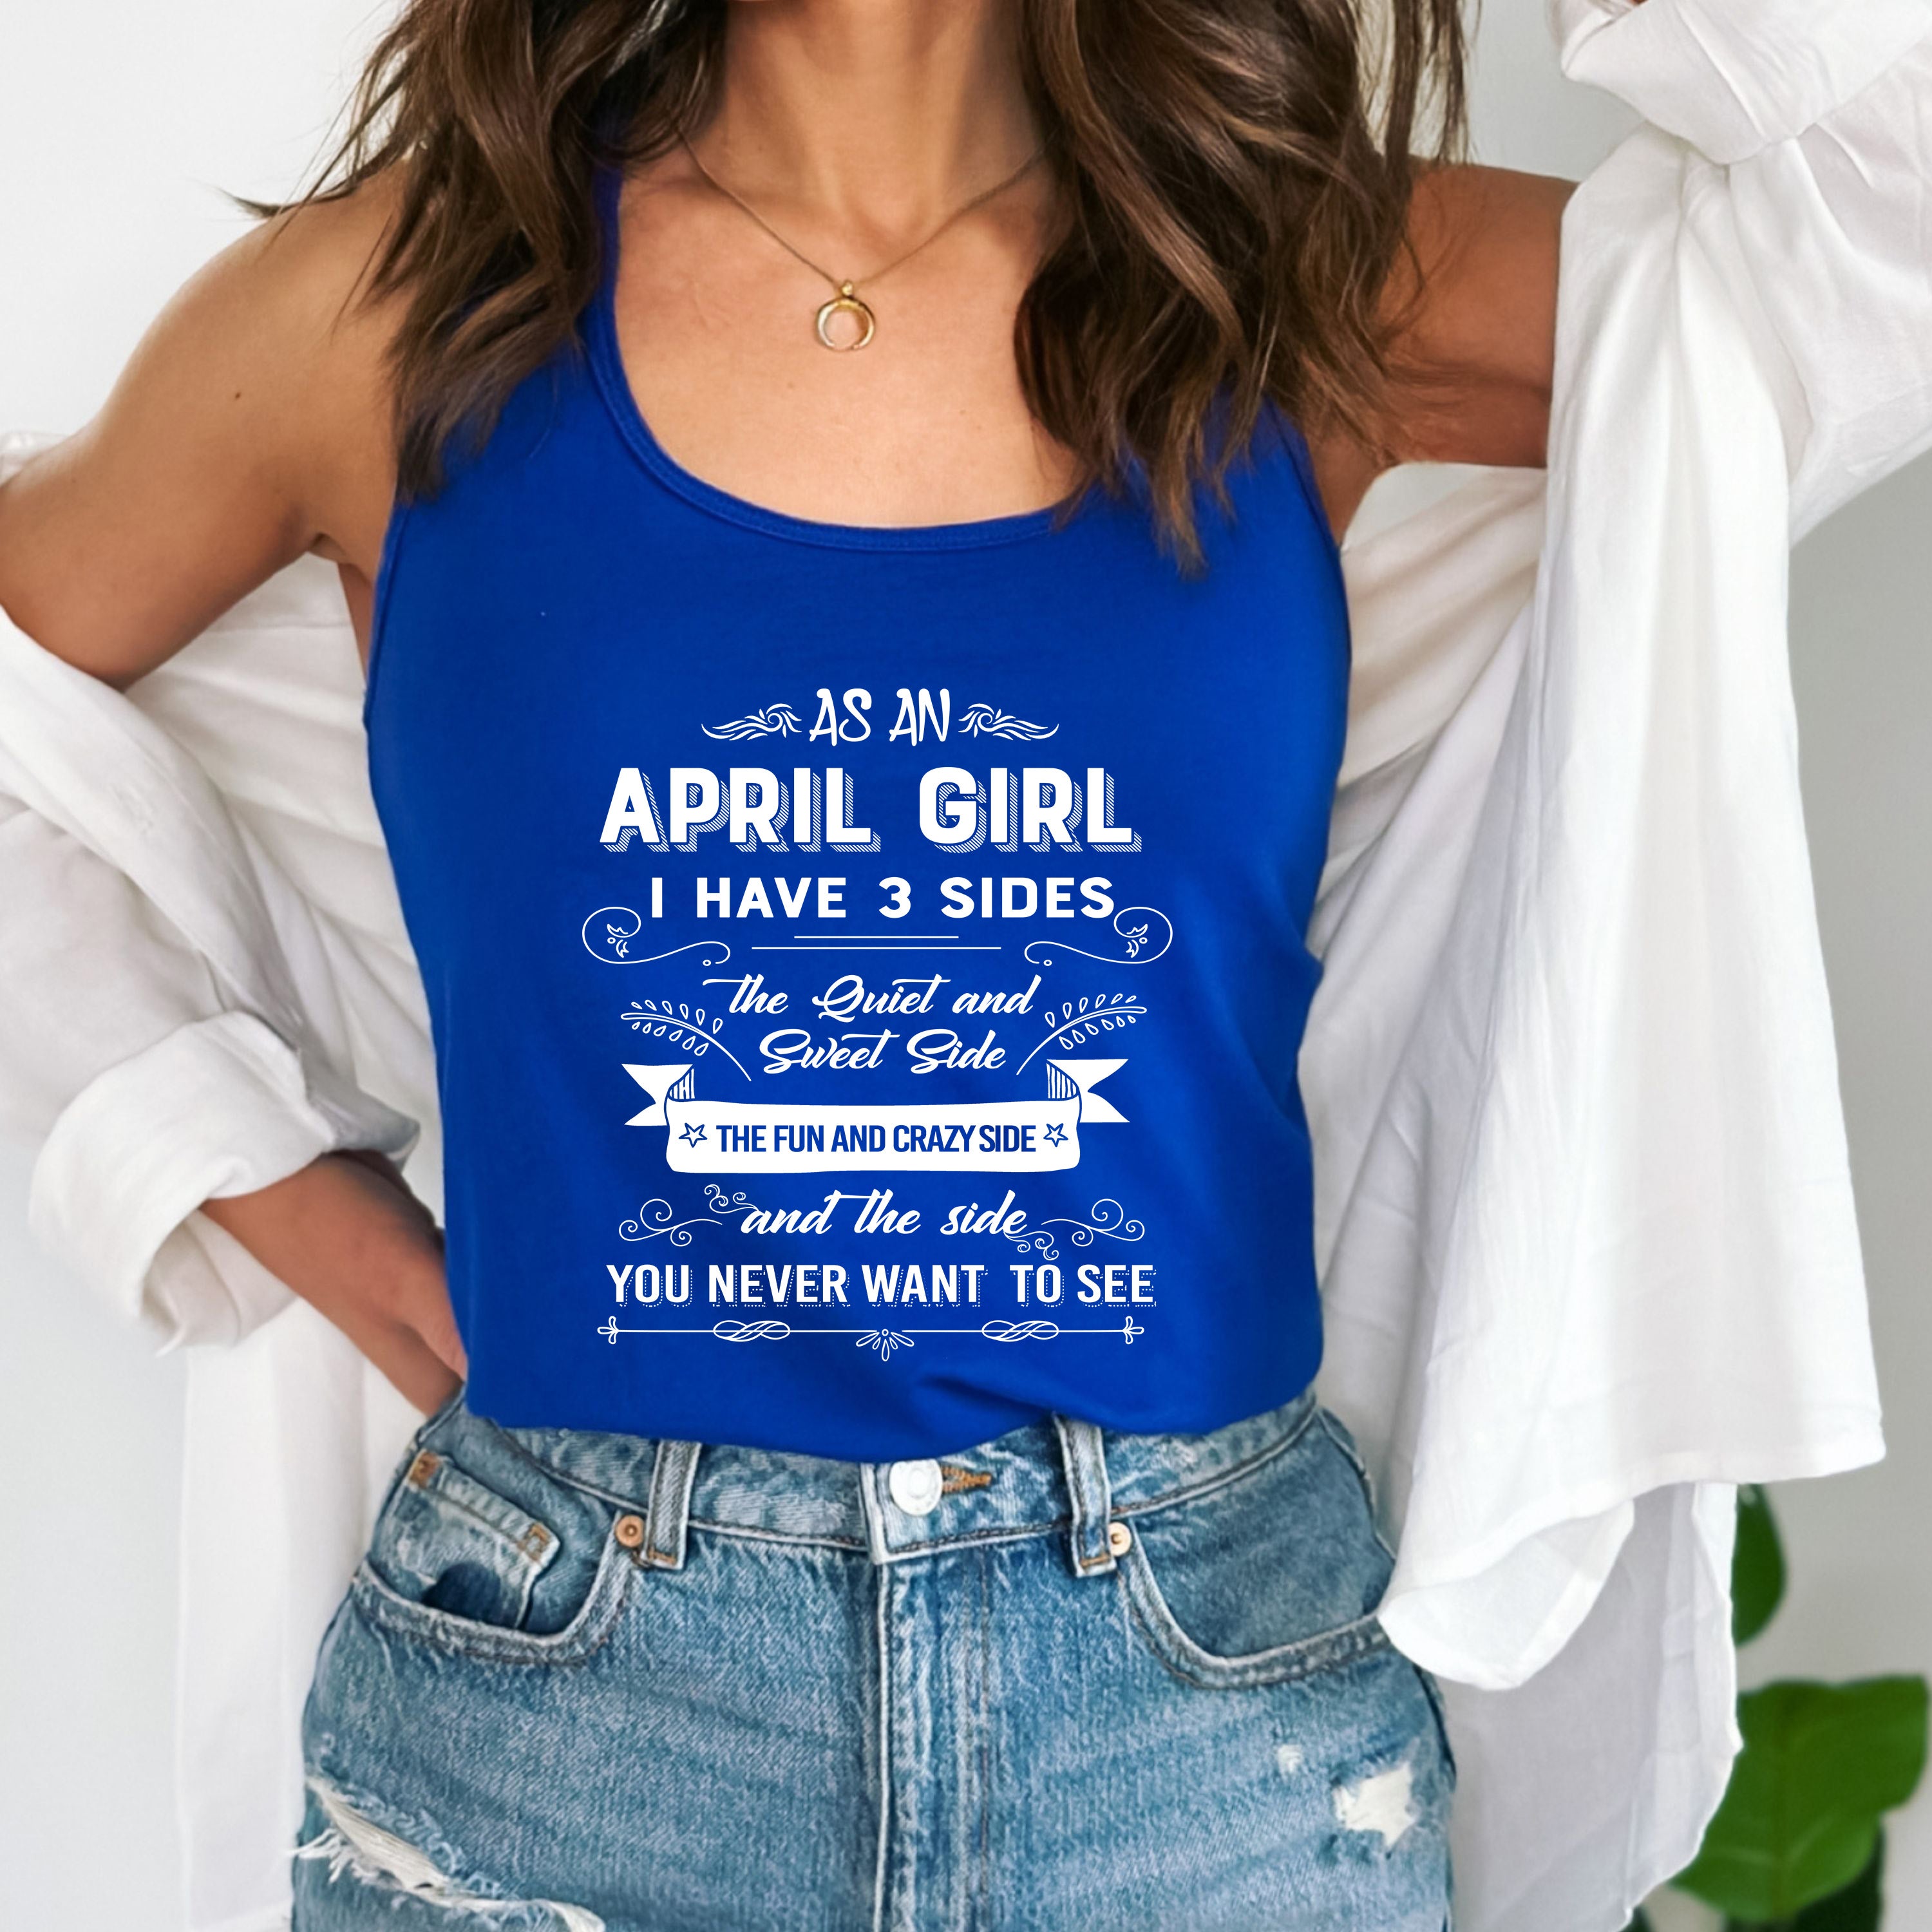 "As a April Girl I have 3 Sides"